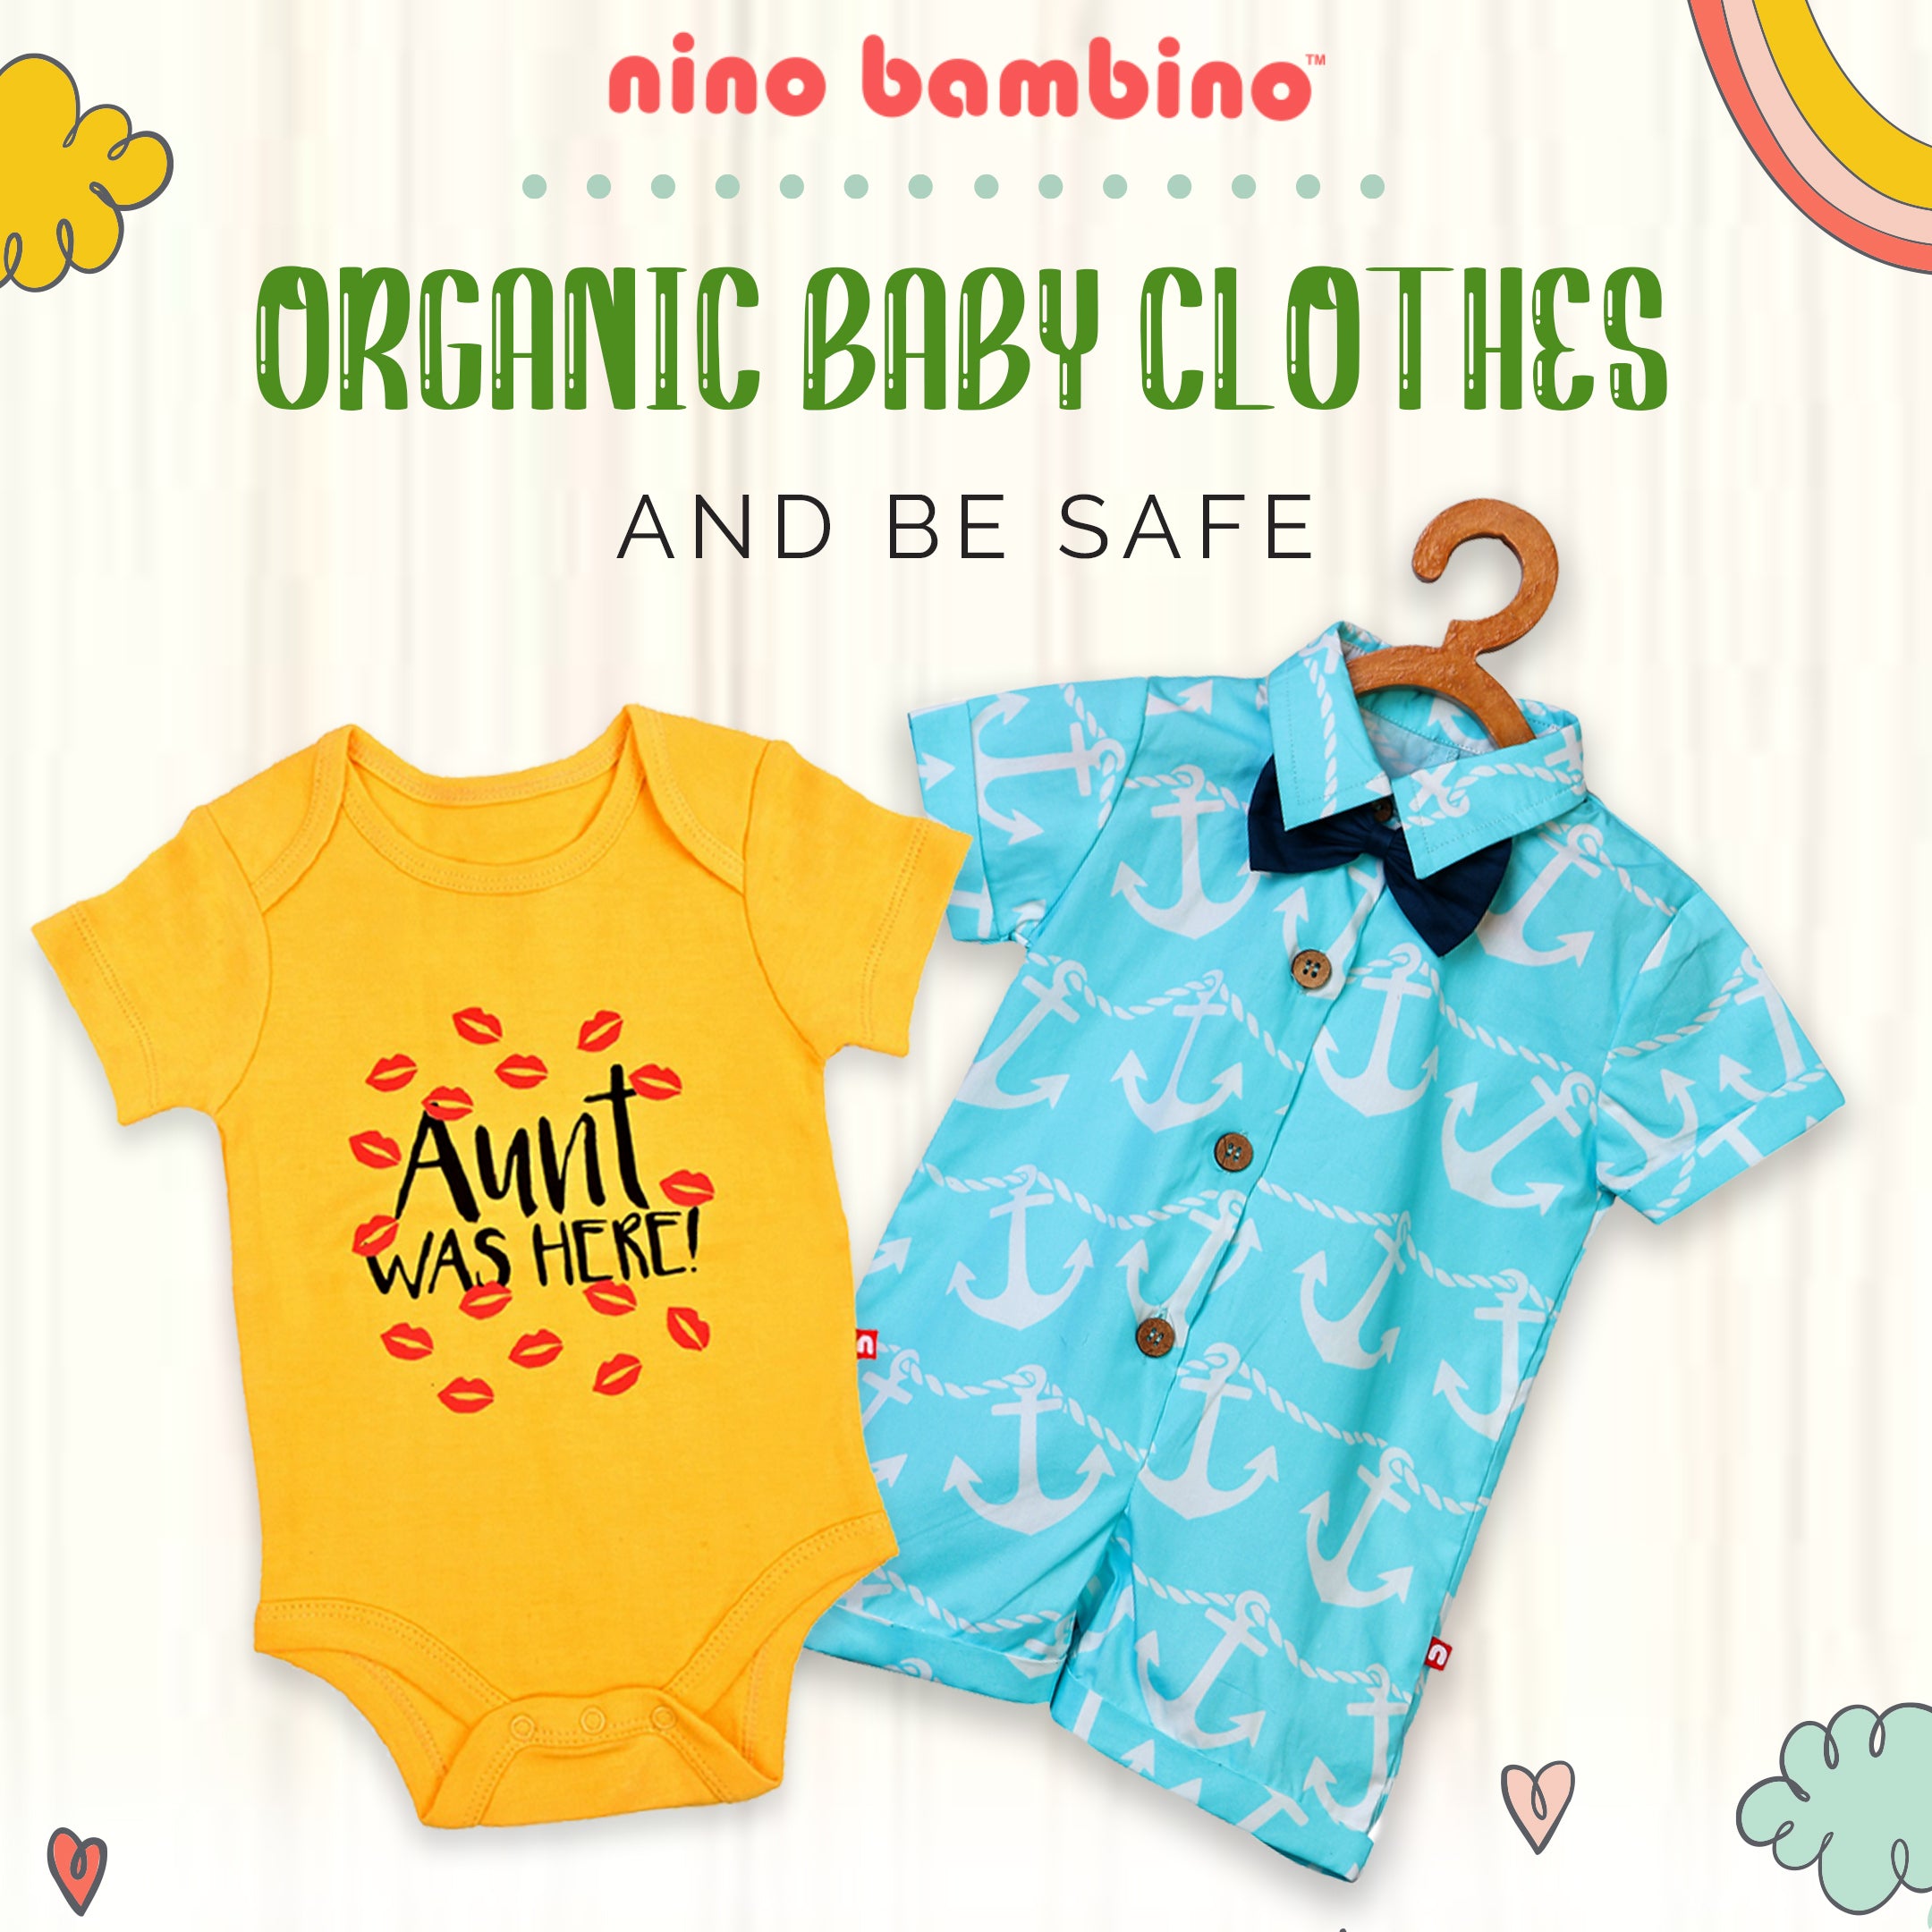 Select Organic Baby Clothes And Be Safe